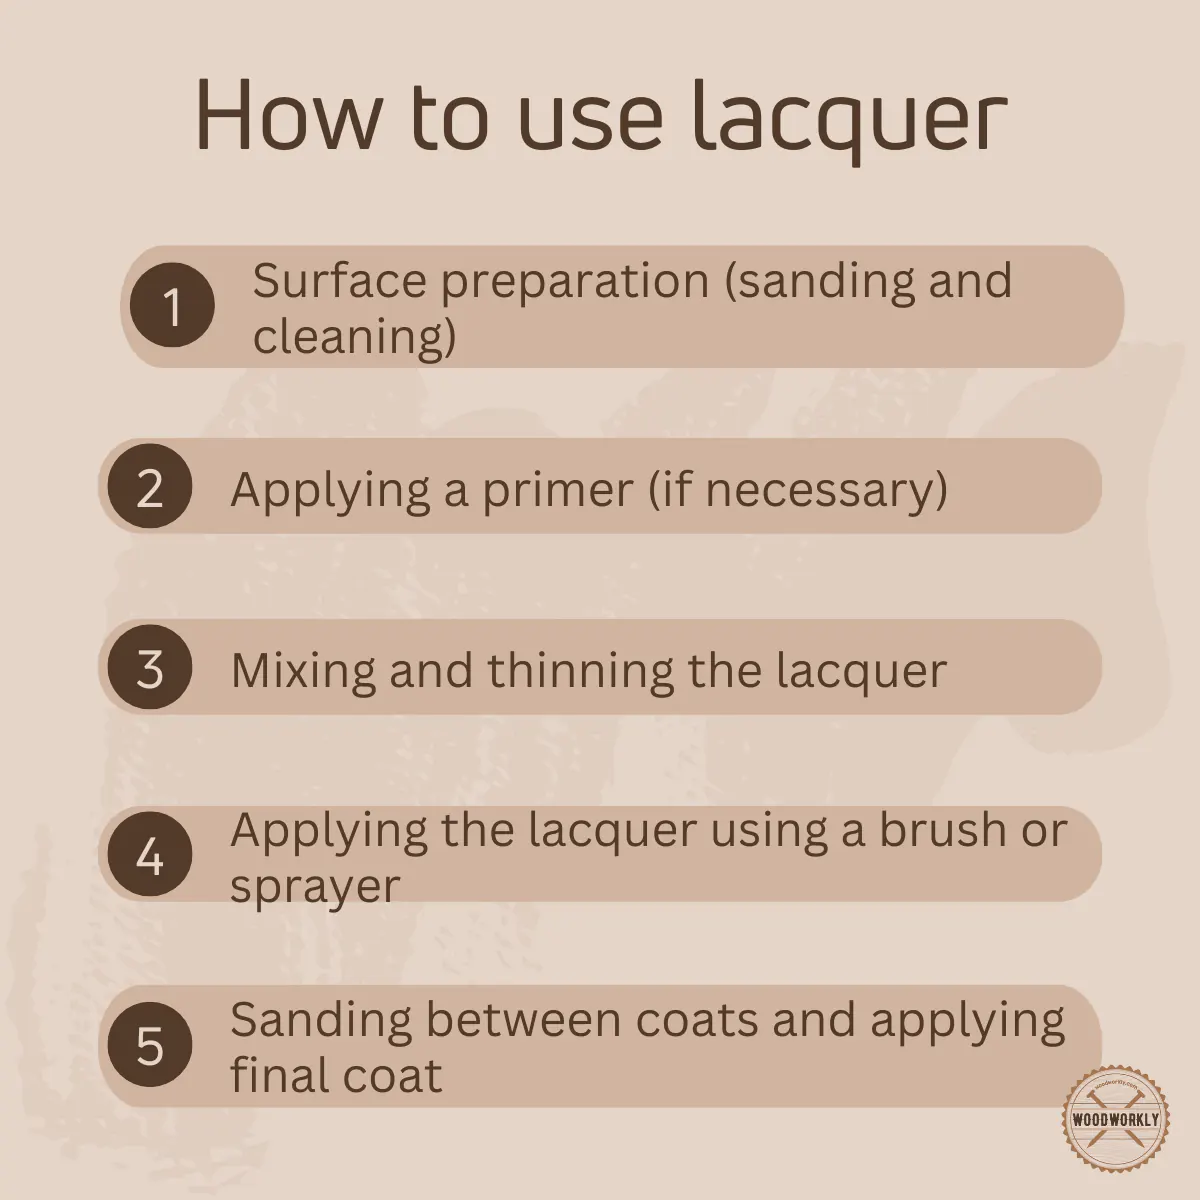 How to use lacquer